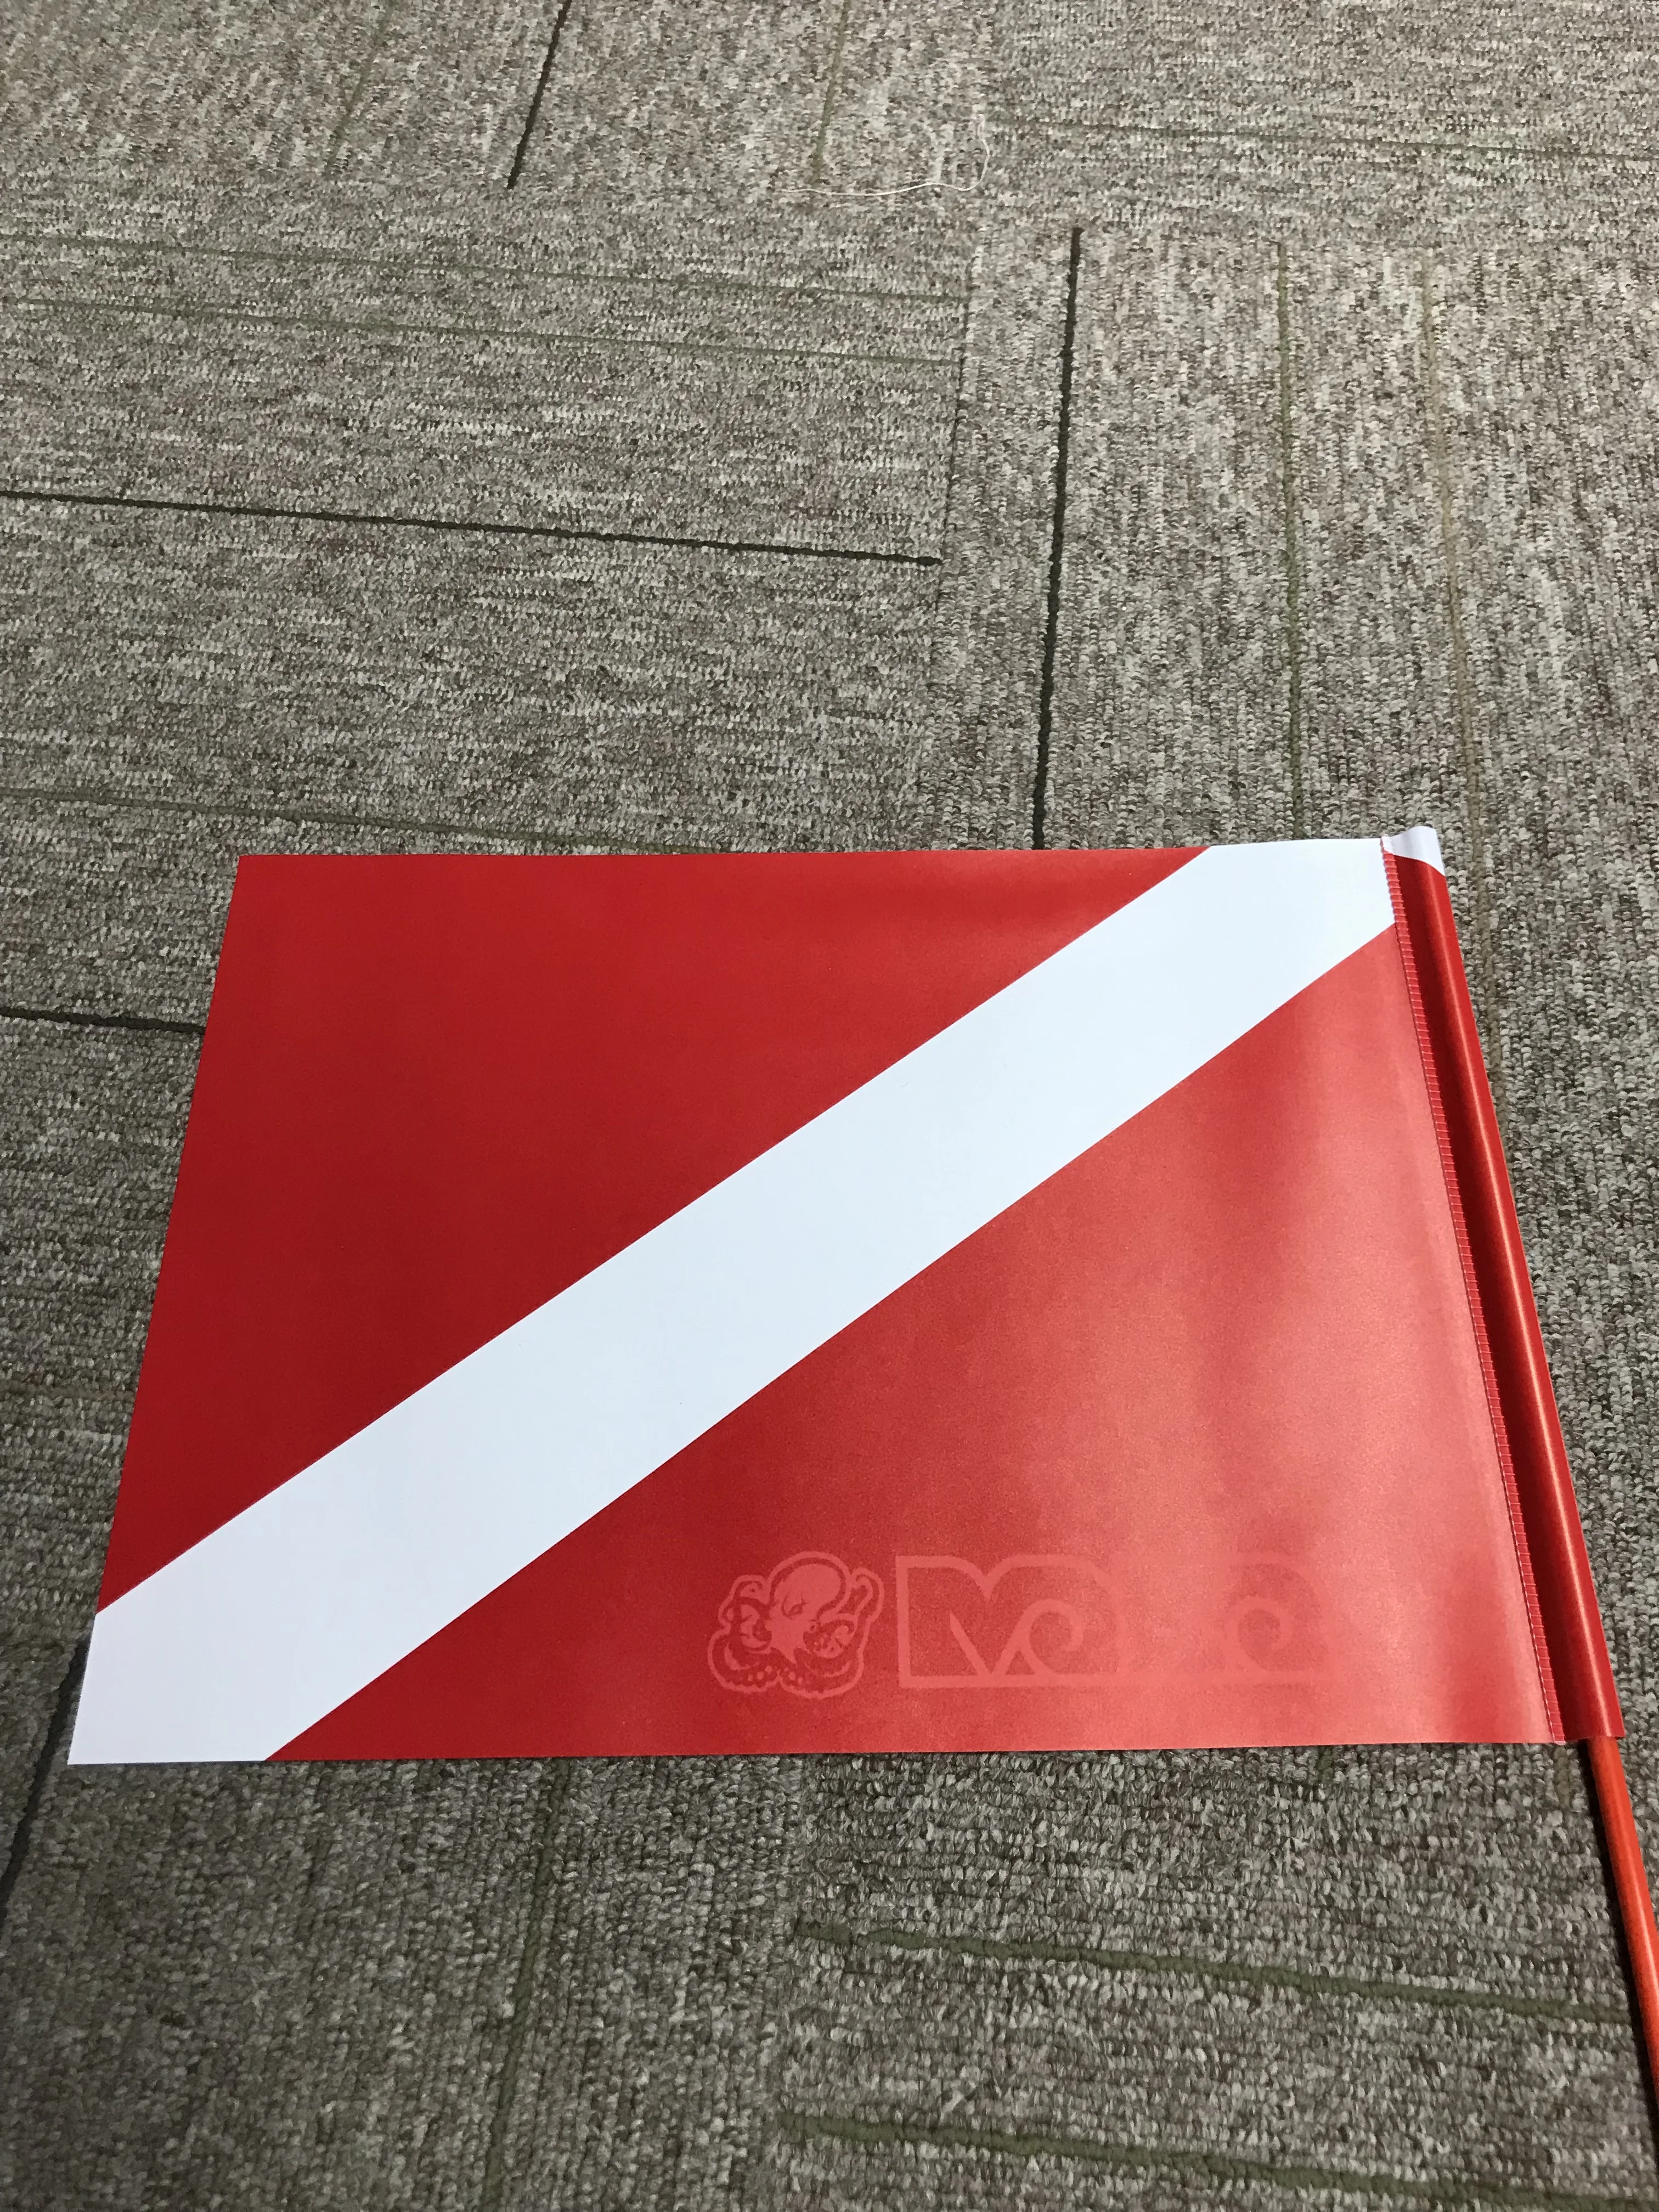 Plastic Diving Flag With Red Fiberglass Pole For Boat